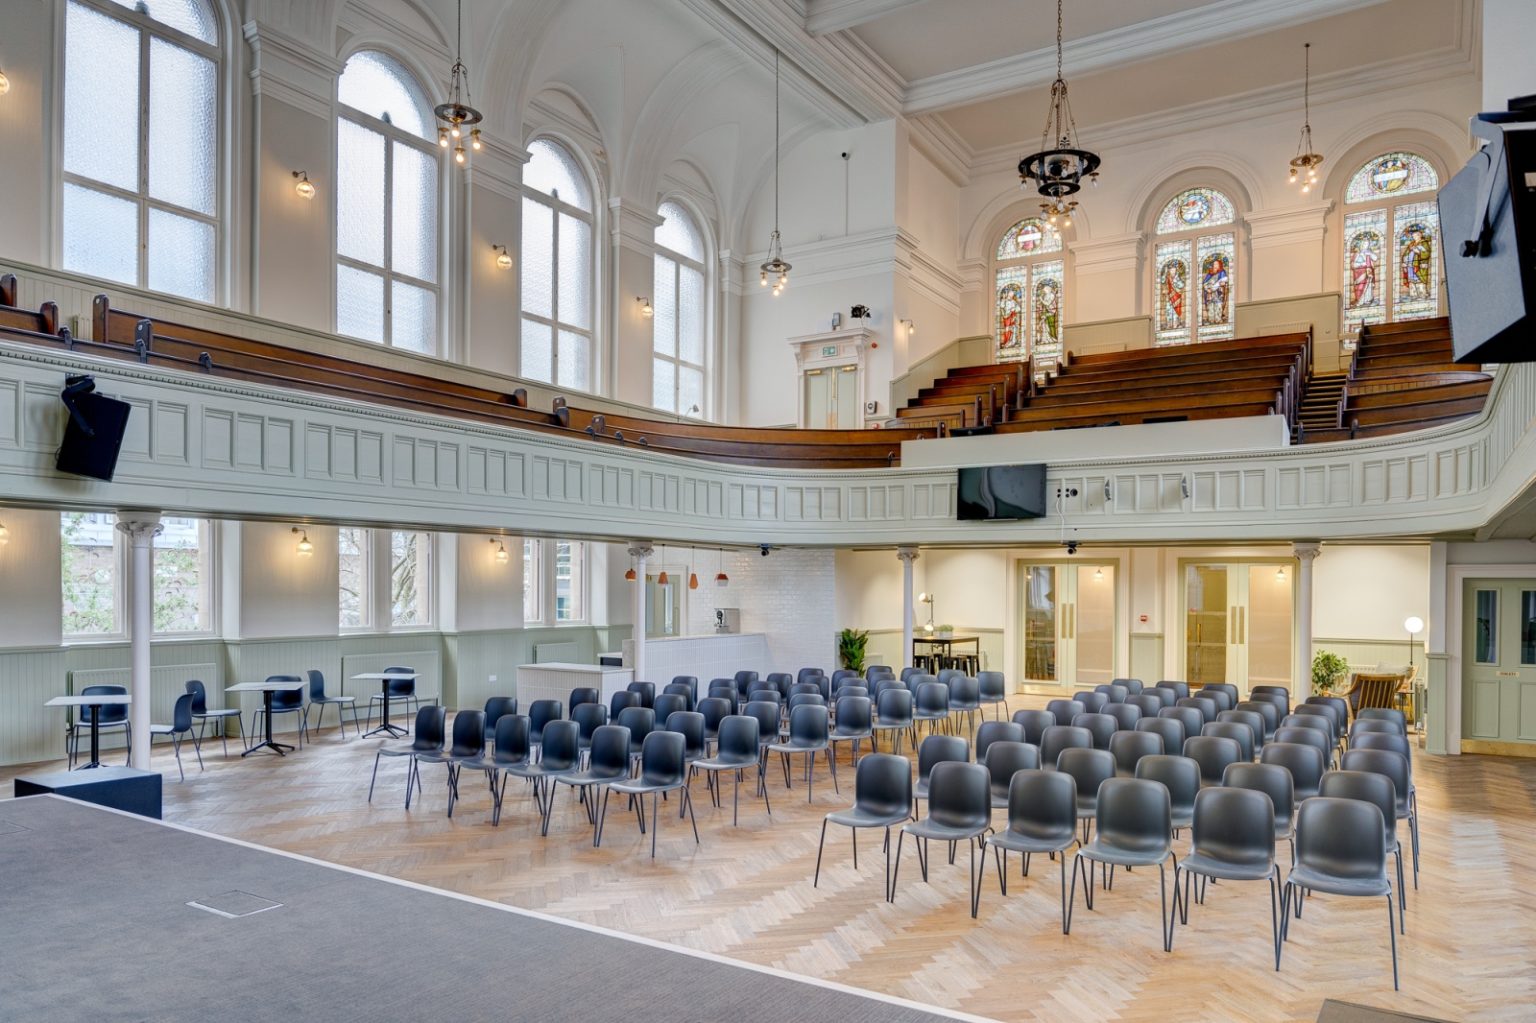 Adelaide Place auditorium. High vaulted ceiling, balcony and stained glass windows